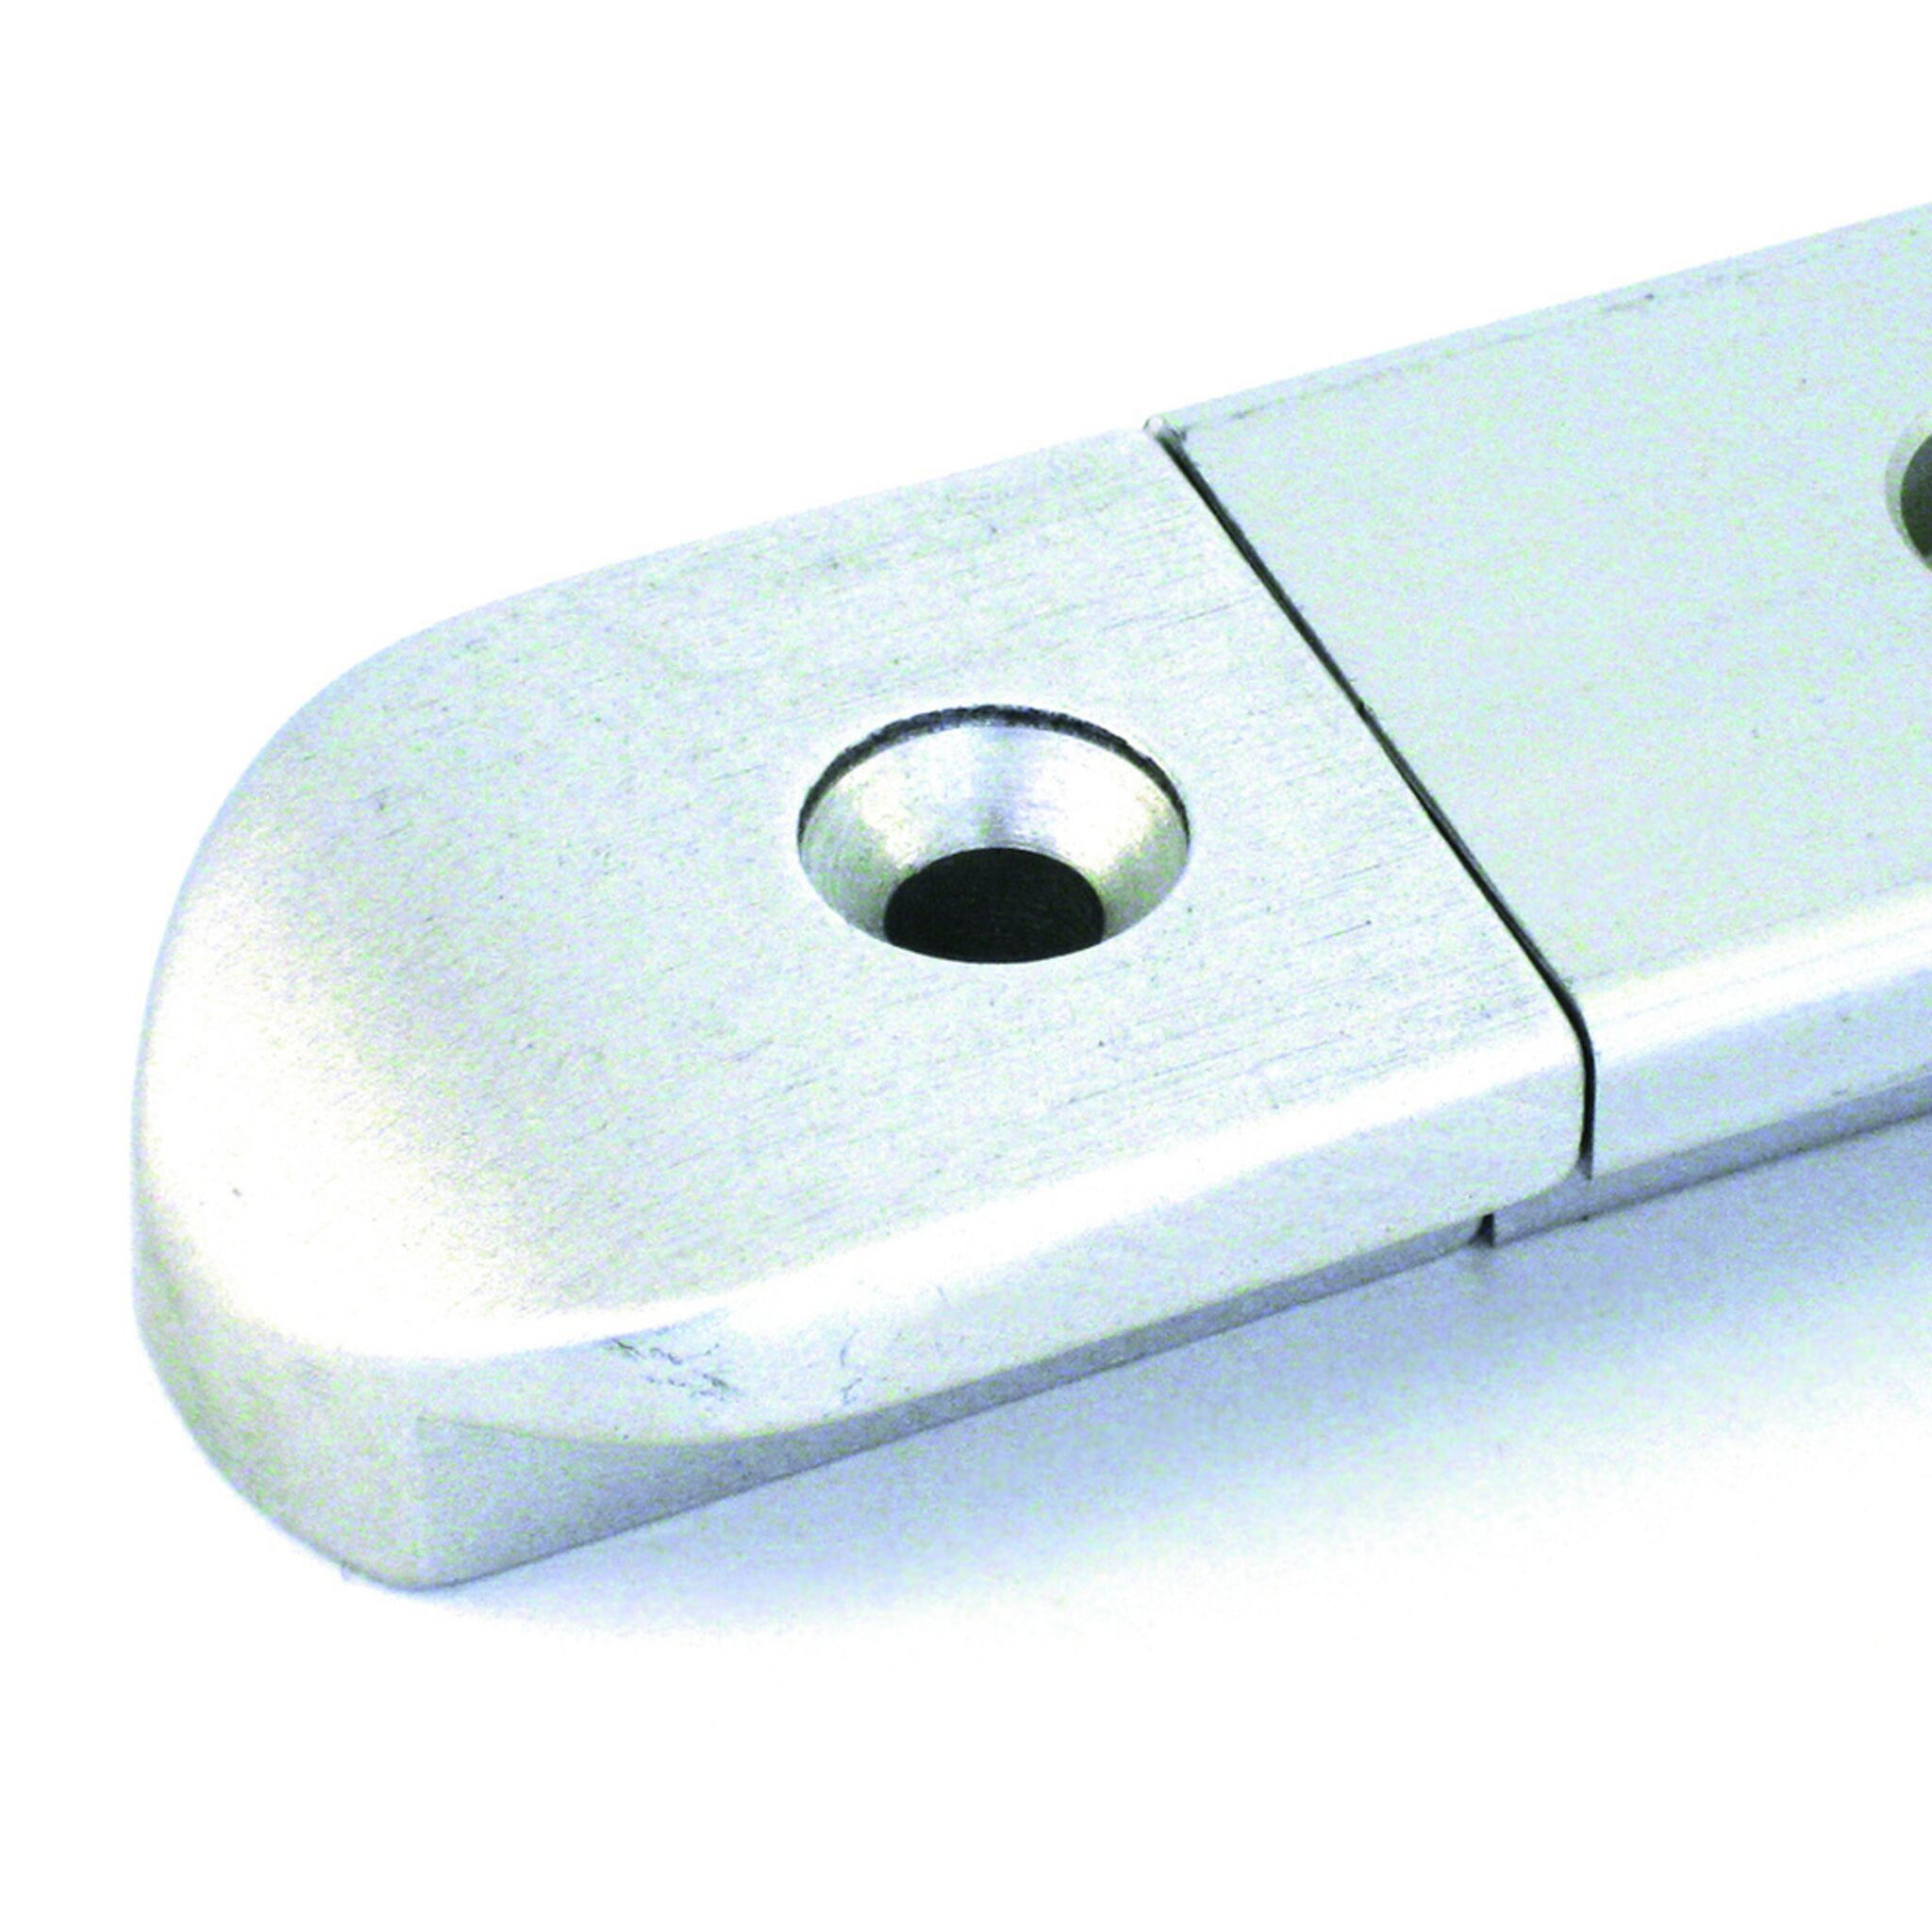 Pfeiffer genoa bar end piece with insertion